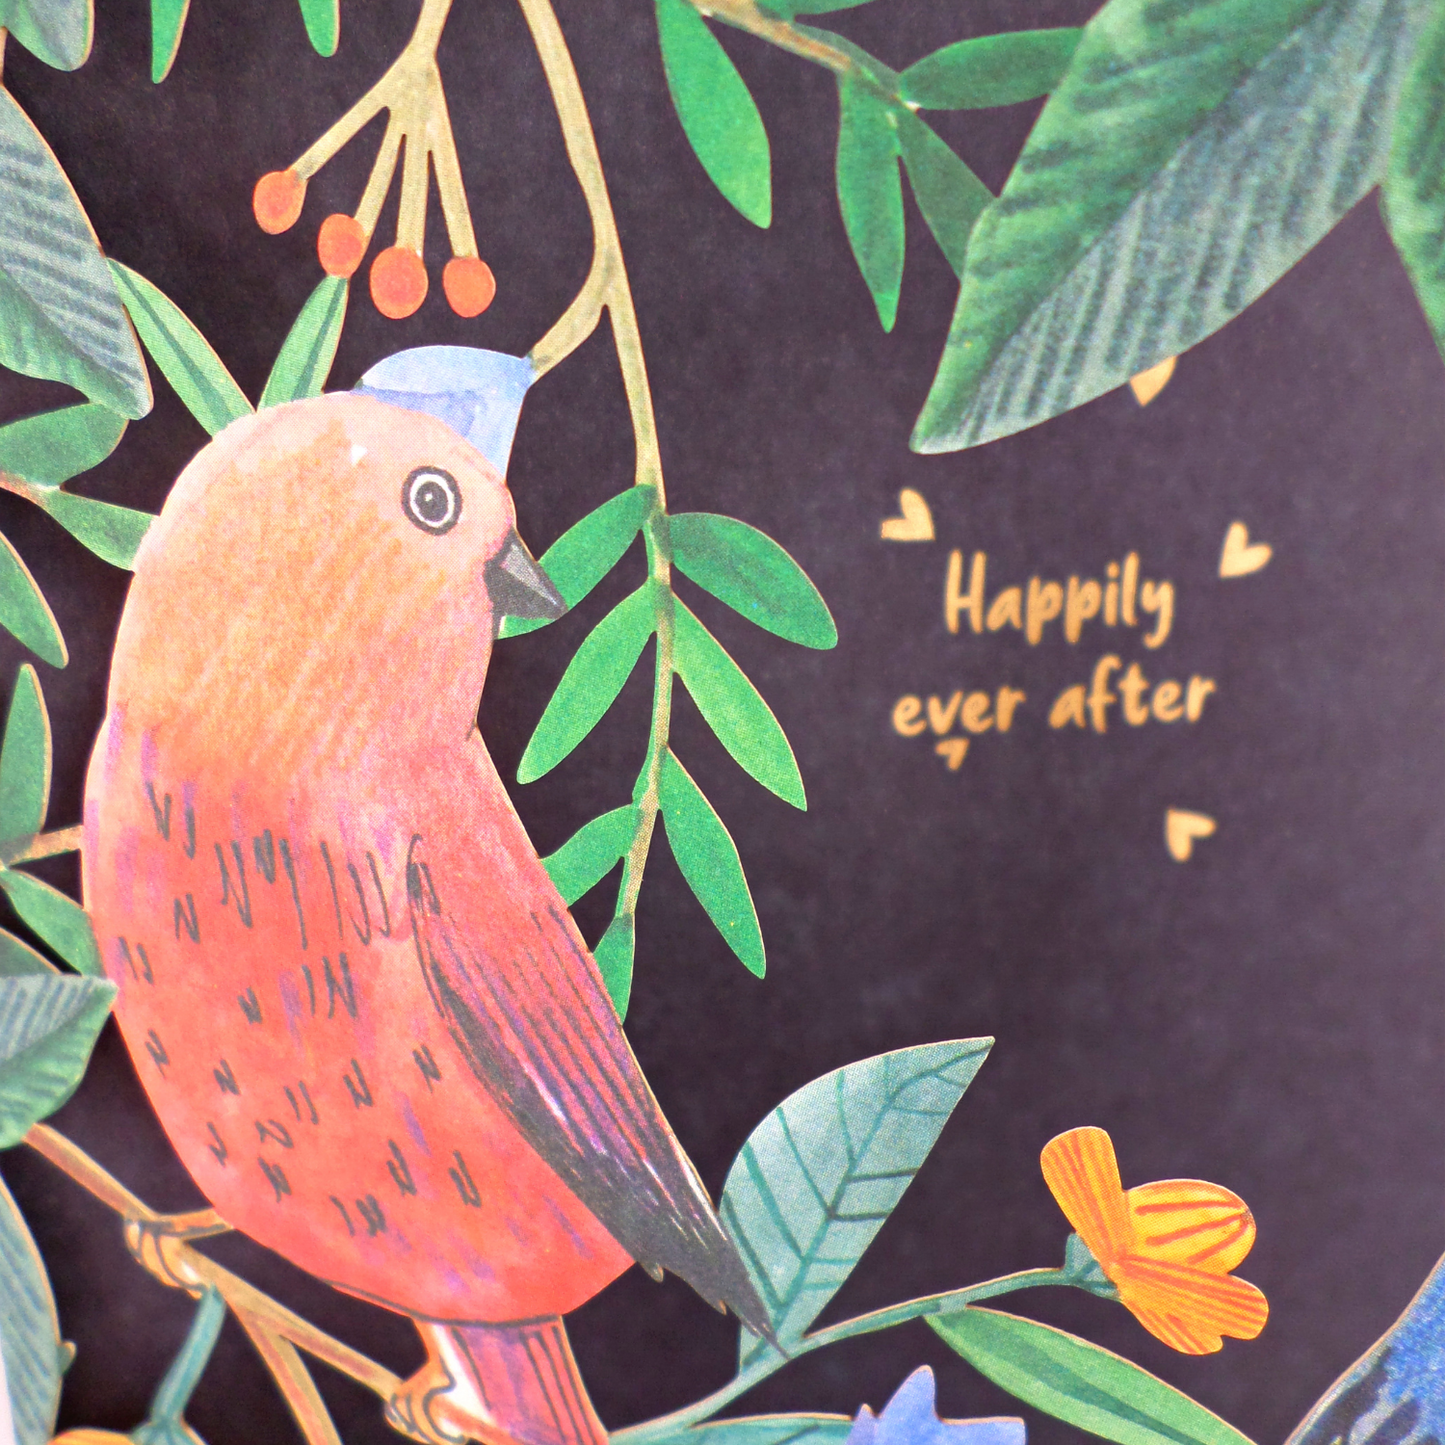 Paper Cut Art Happily Ever After Wedding Greeting Card